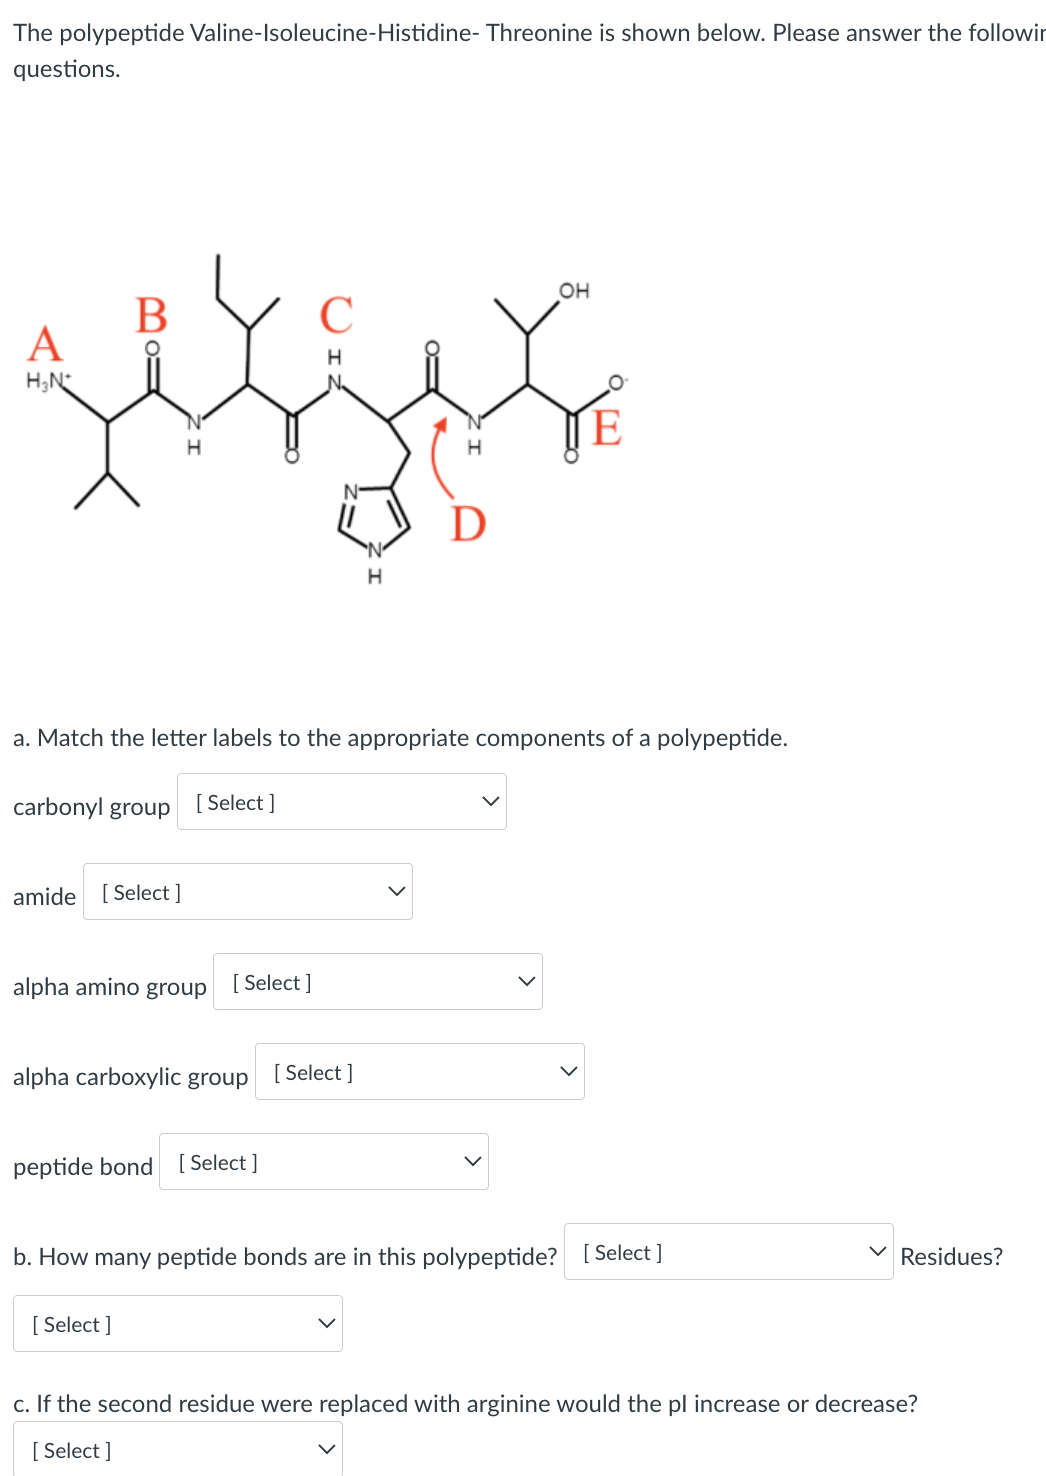 The polypeptide Valine-Isoleucine-Histidine- Threonine is shown below. Please answer the followin
questions.
A
H₂N*
B
carbonyl group
amide [Select]
H
[Select]
alpha amino group
a. Match the letter labels to the appropriate components of a polypeptide.
[Select]
[Select]
alpha carboxylic group
peptide bond [Select]
C
H
H
[Select]
D
OH
E
b. How many peptide bonds are in this polypeptide? [Select]
Residues?
c. If the second residue were replaced with arginine would the pl increase or decrease?
[Select]